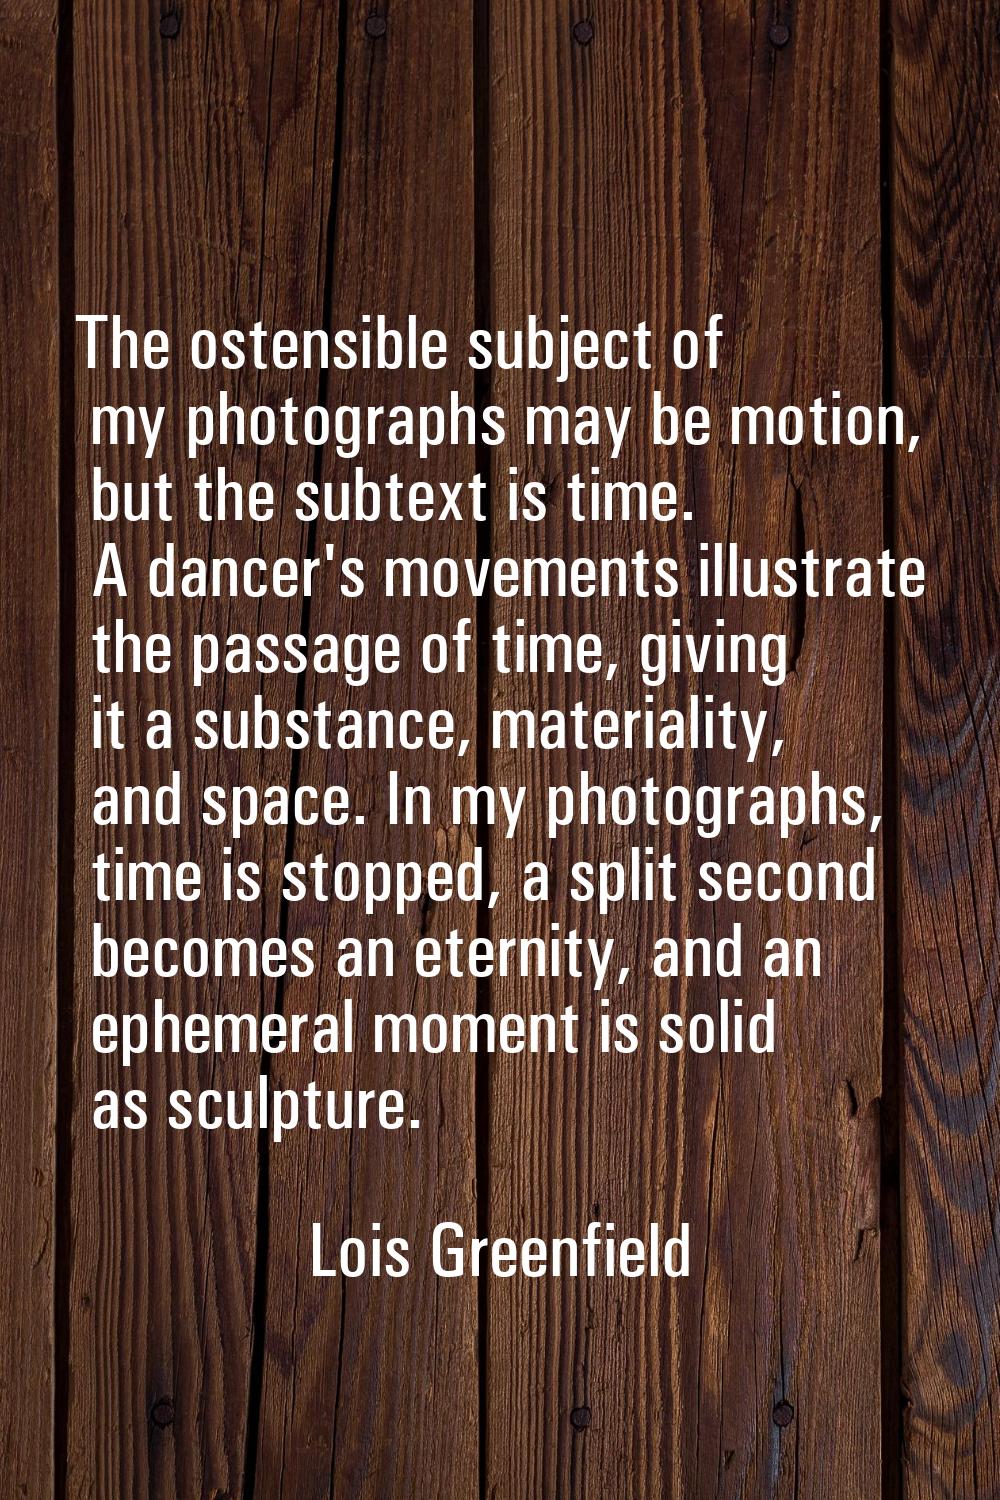 The ostensible subject of my photographs may be motion, but the subtext is time. A dancer's movemen